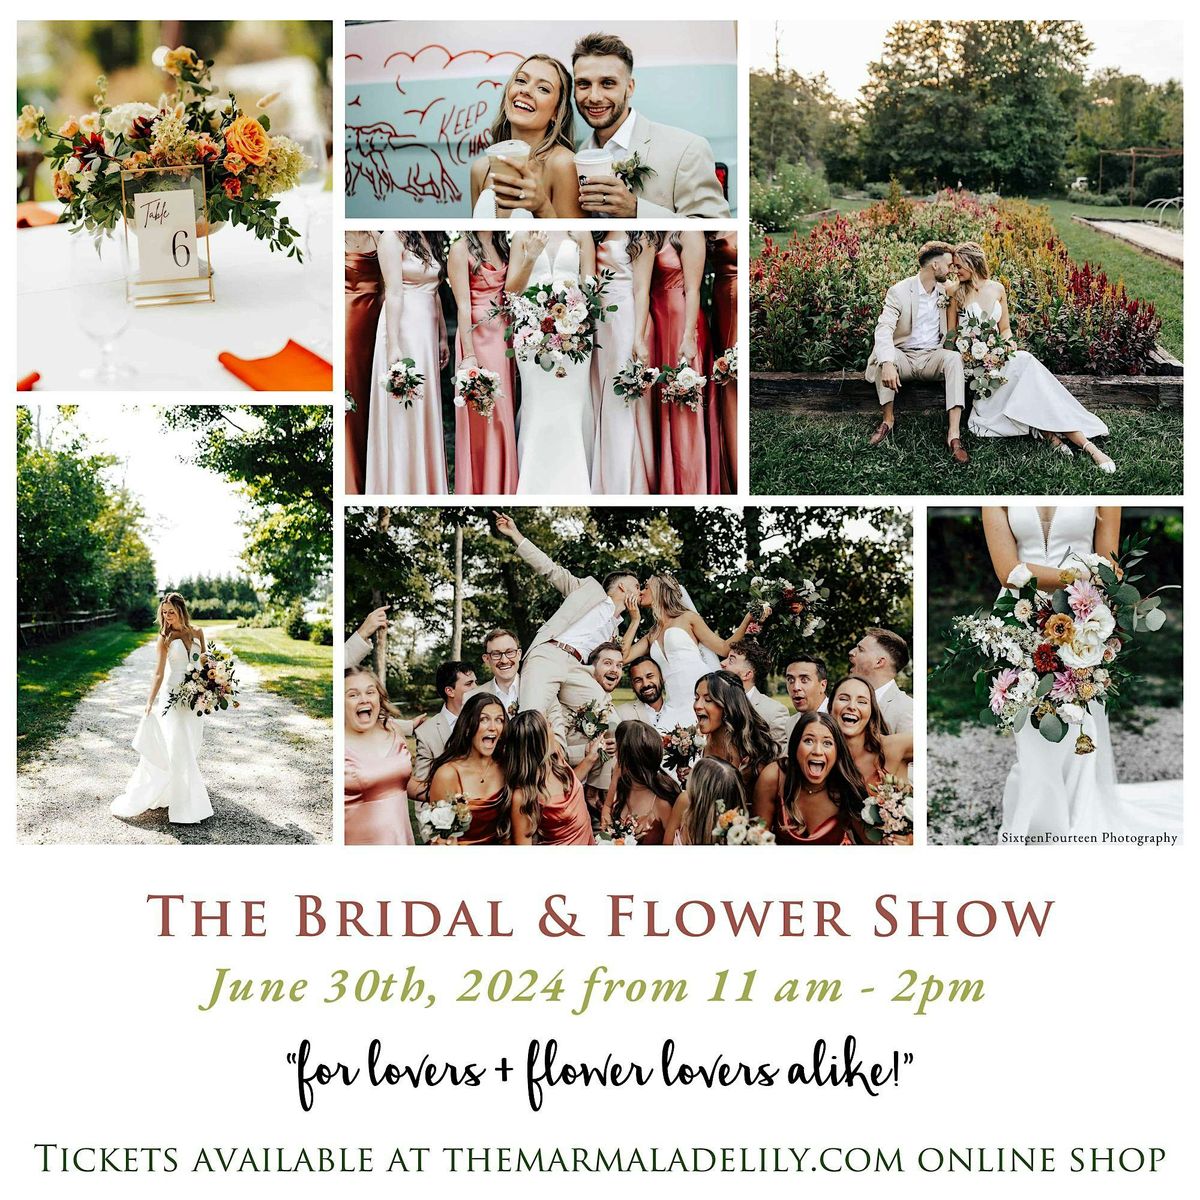 The Bridal & Flower Show at The Marmalade Lily